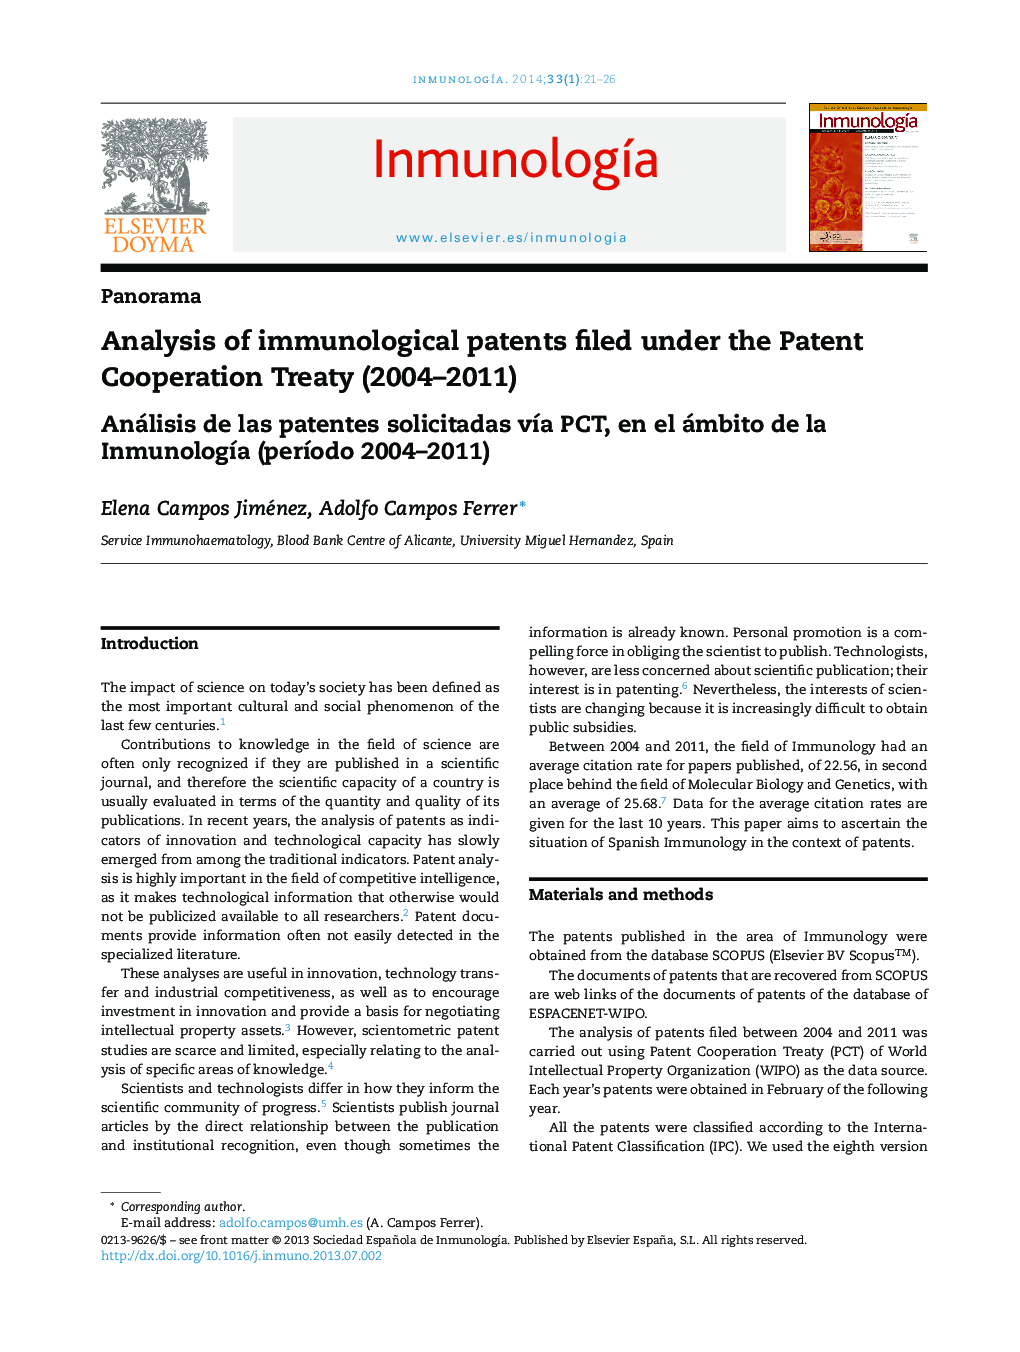 Analysis of immunological patents filed under the Patent Cooperation Treaty (2004-2011)